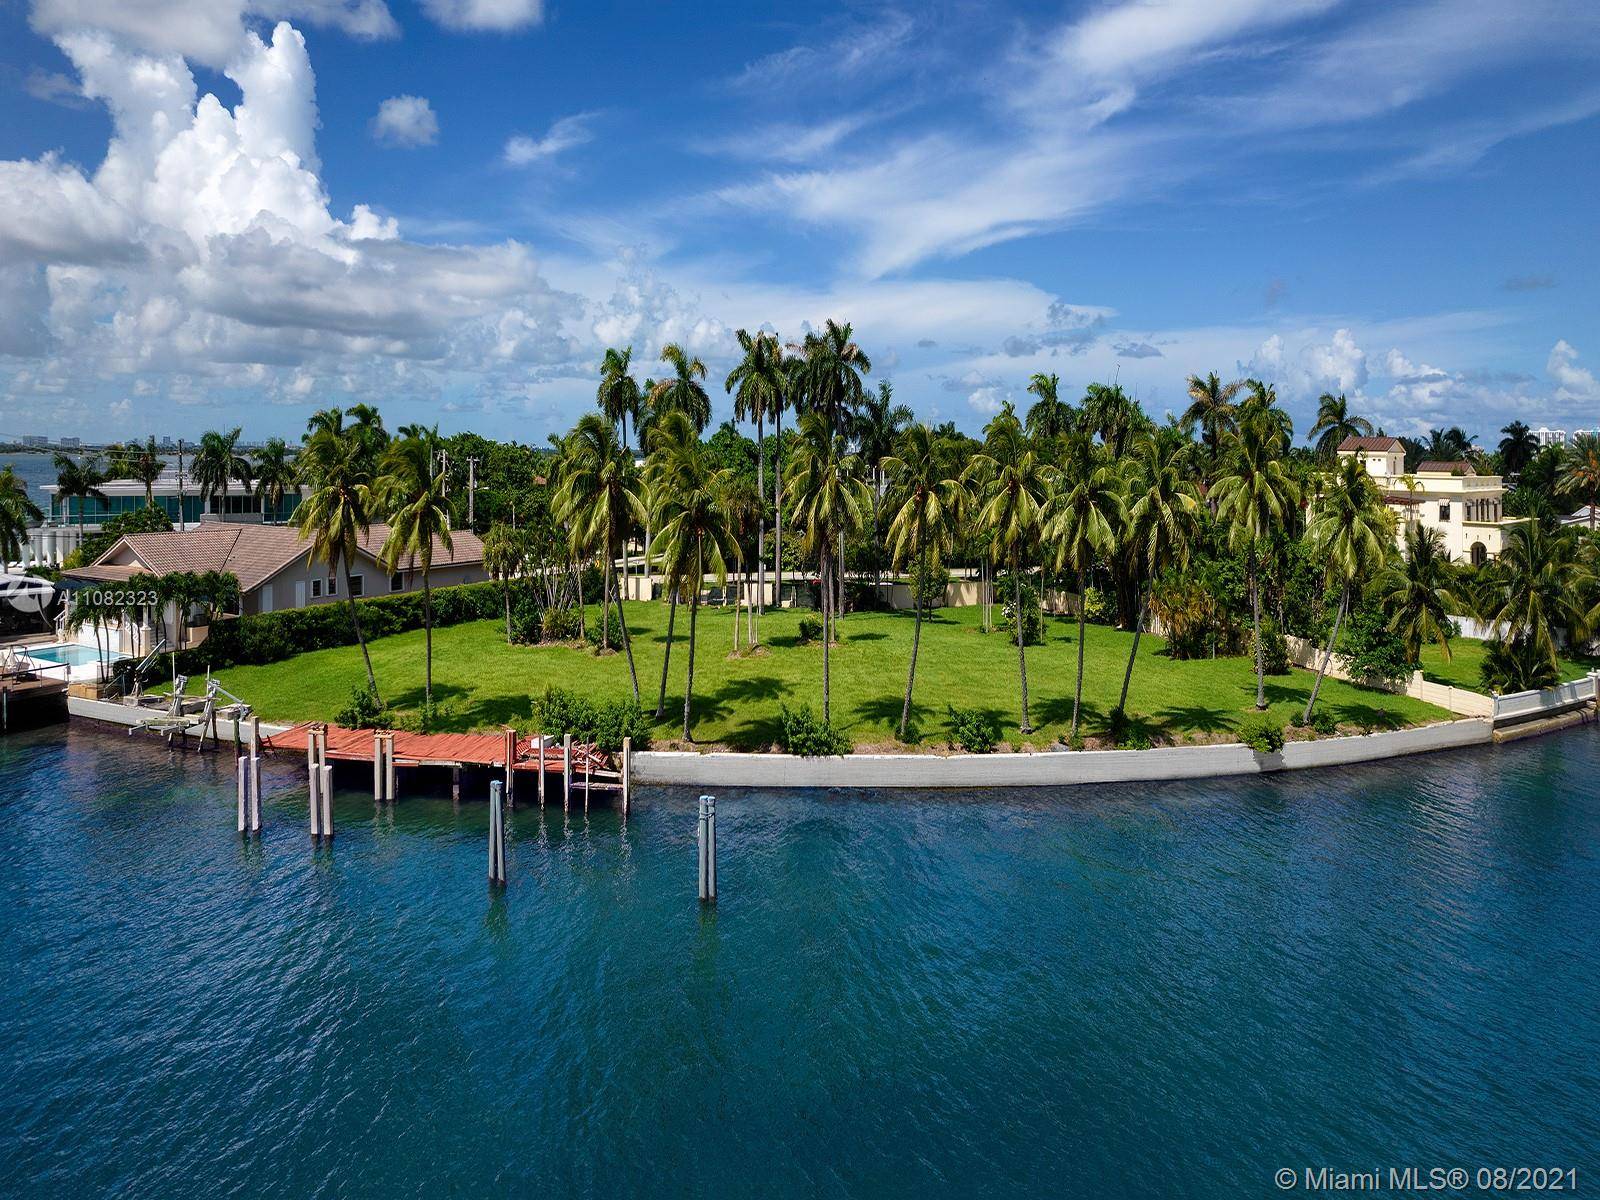 Build the home of your dreams on this trophy waterfront property, a double lot with approximately 27, 000 sq ft and 208 ft of waterfrontage on the southwest tip of ...